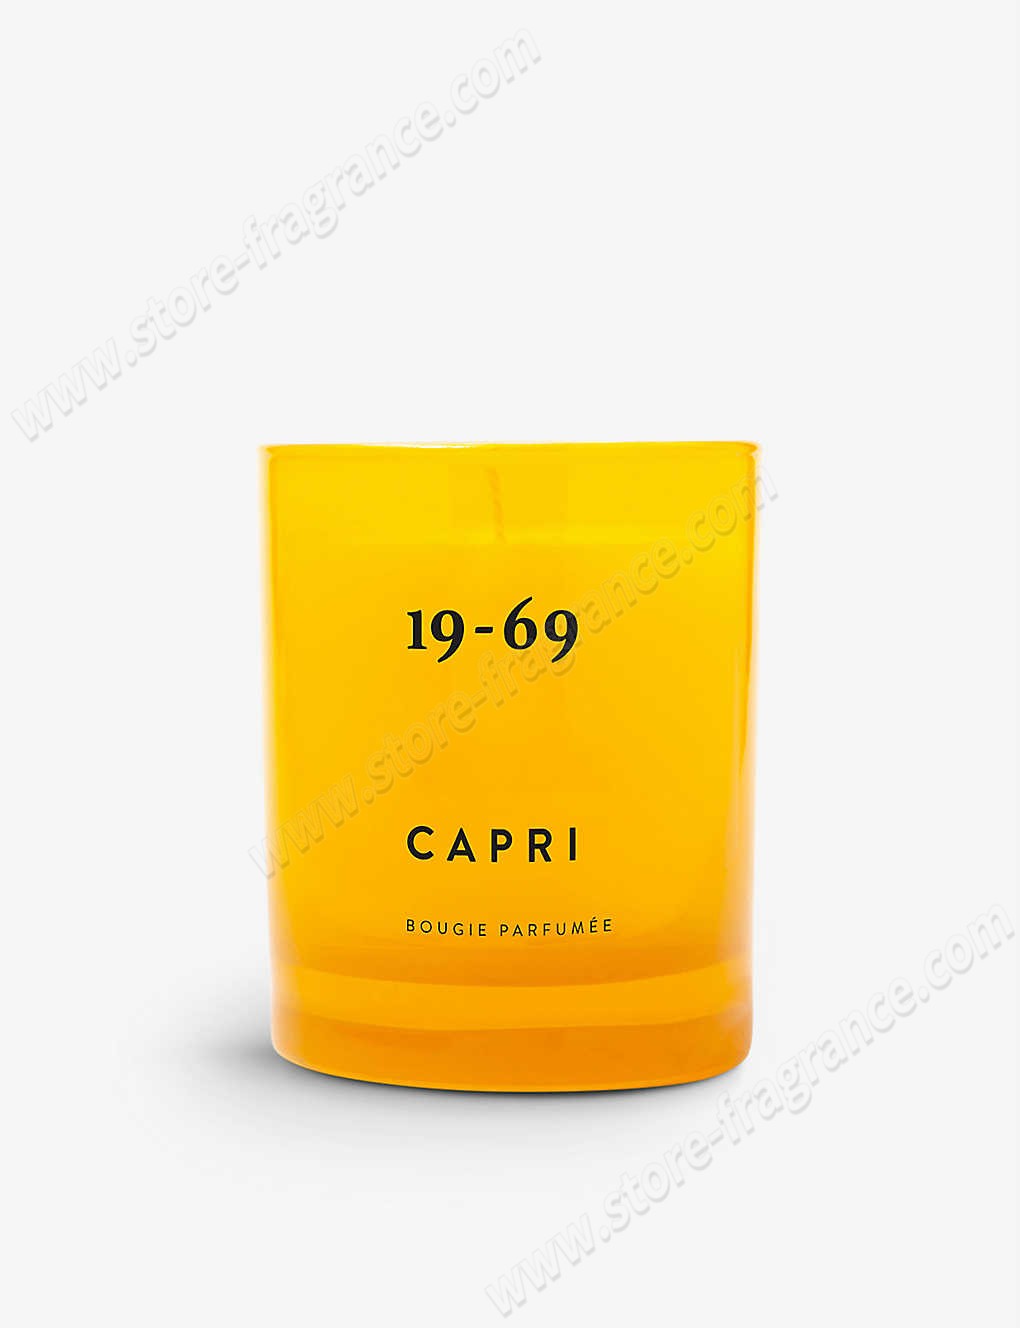 19-69/Capri vegetable-wax scented candle 200ml ✿ Discount Store - -0